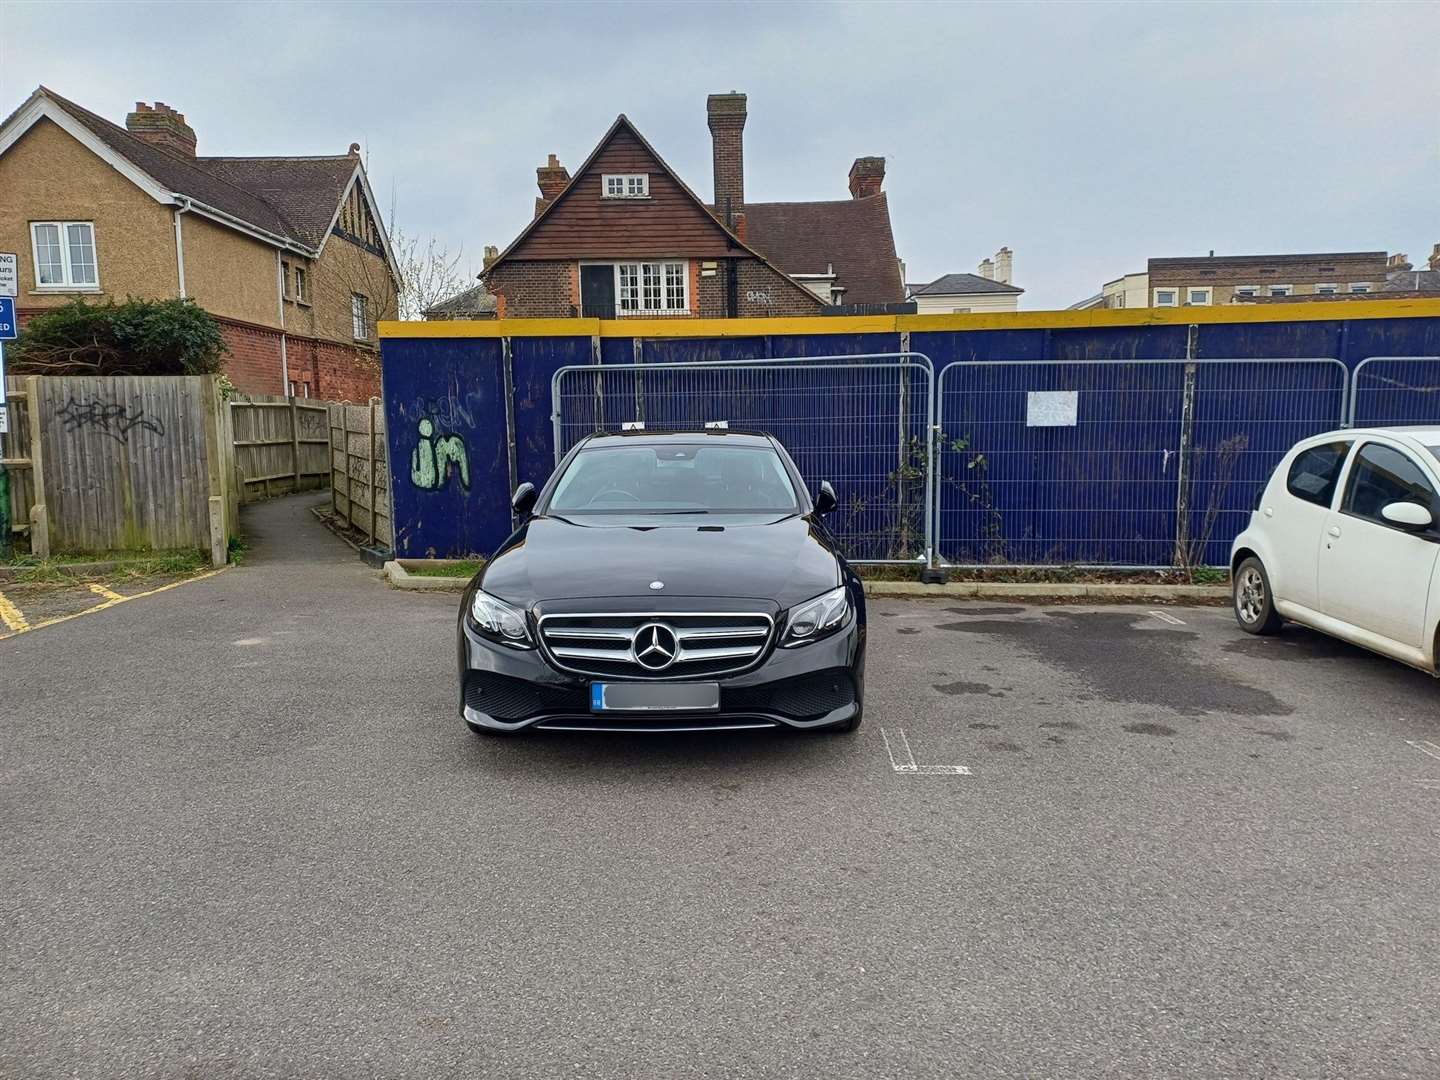 Diana says this Mercedes-Benz driver would be fined for where they have parked